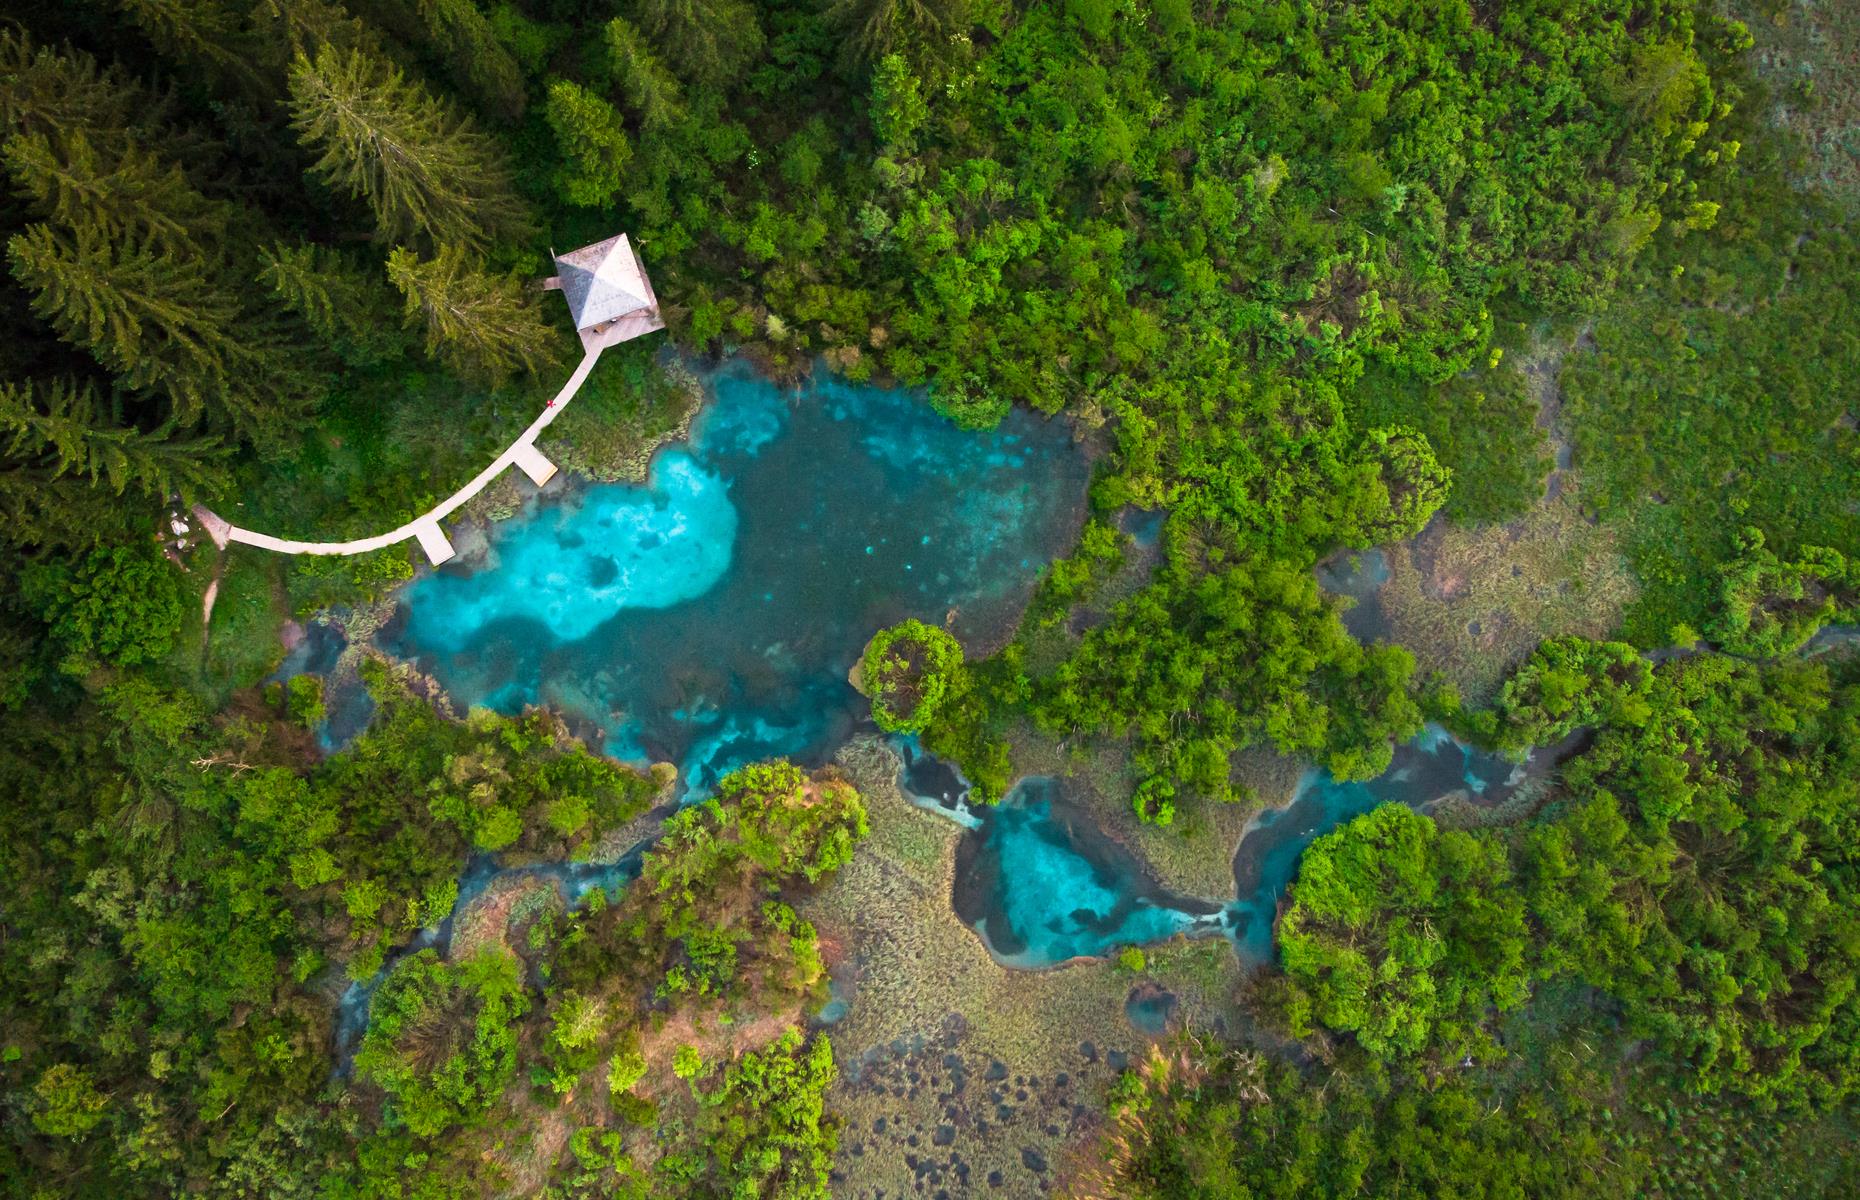 With its striking bright blue waters surrounded by lush green forest, Zelenci Lake is an impressive sight from above. Located in Zelenci Nature Reserve in northwestern Slovenia, the lake's striking color comes from a natural spring that flows through the layers of sedimentary rock below.